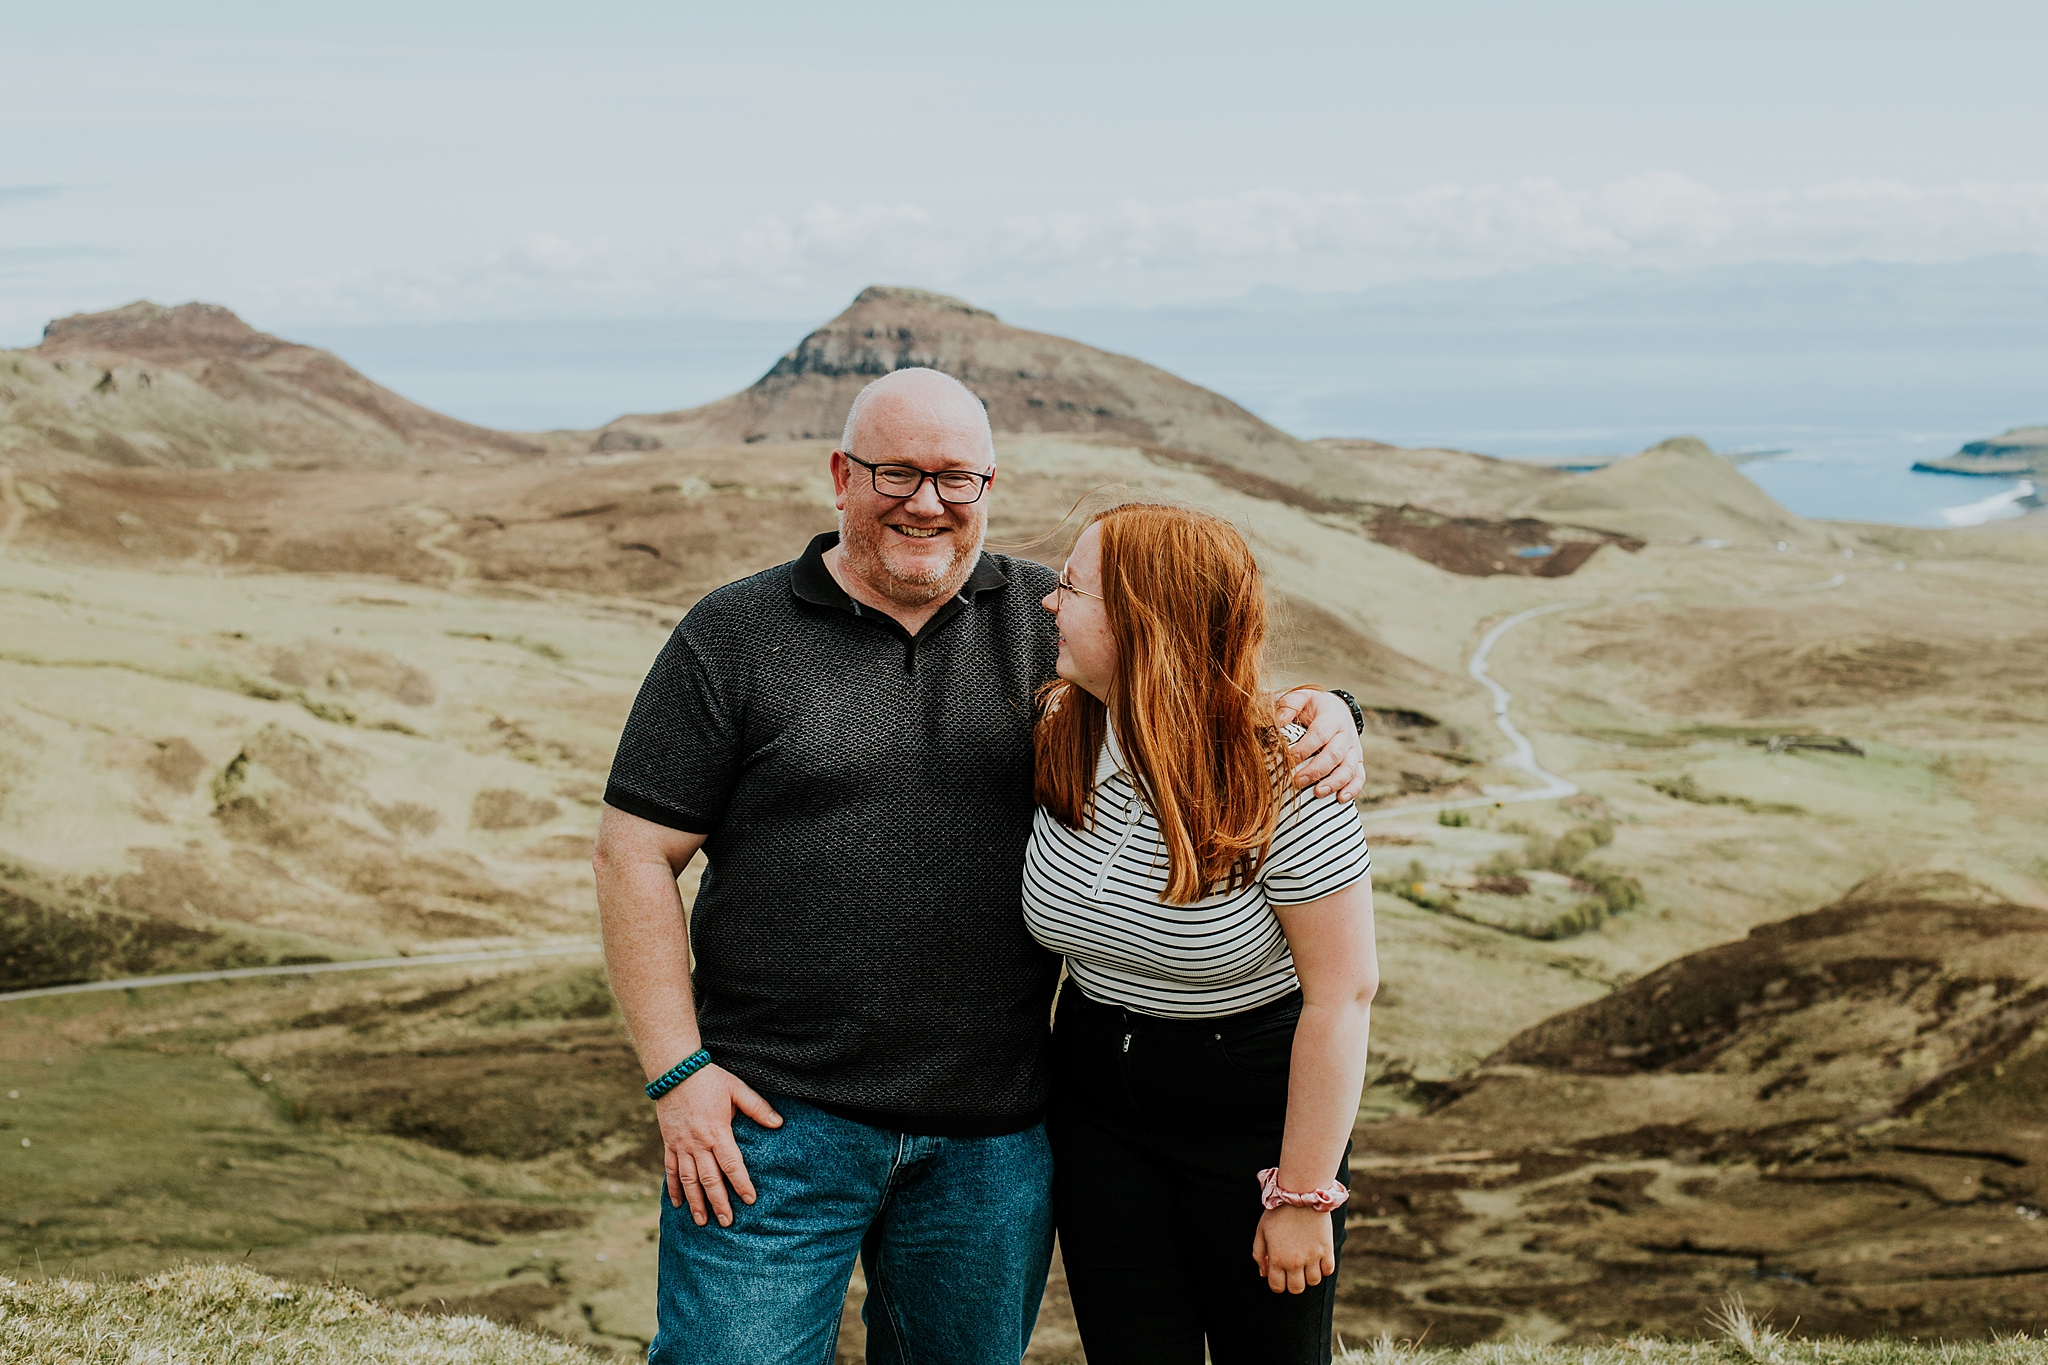 dad smiling and hugging red haired daughter who is looking up at him overlooking staffin on the isle of skye from the quiraing